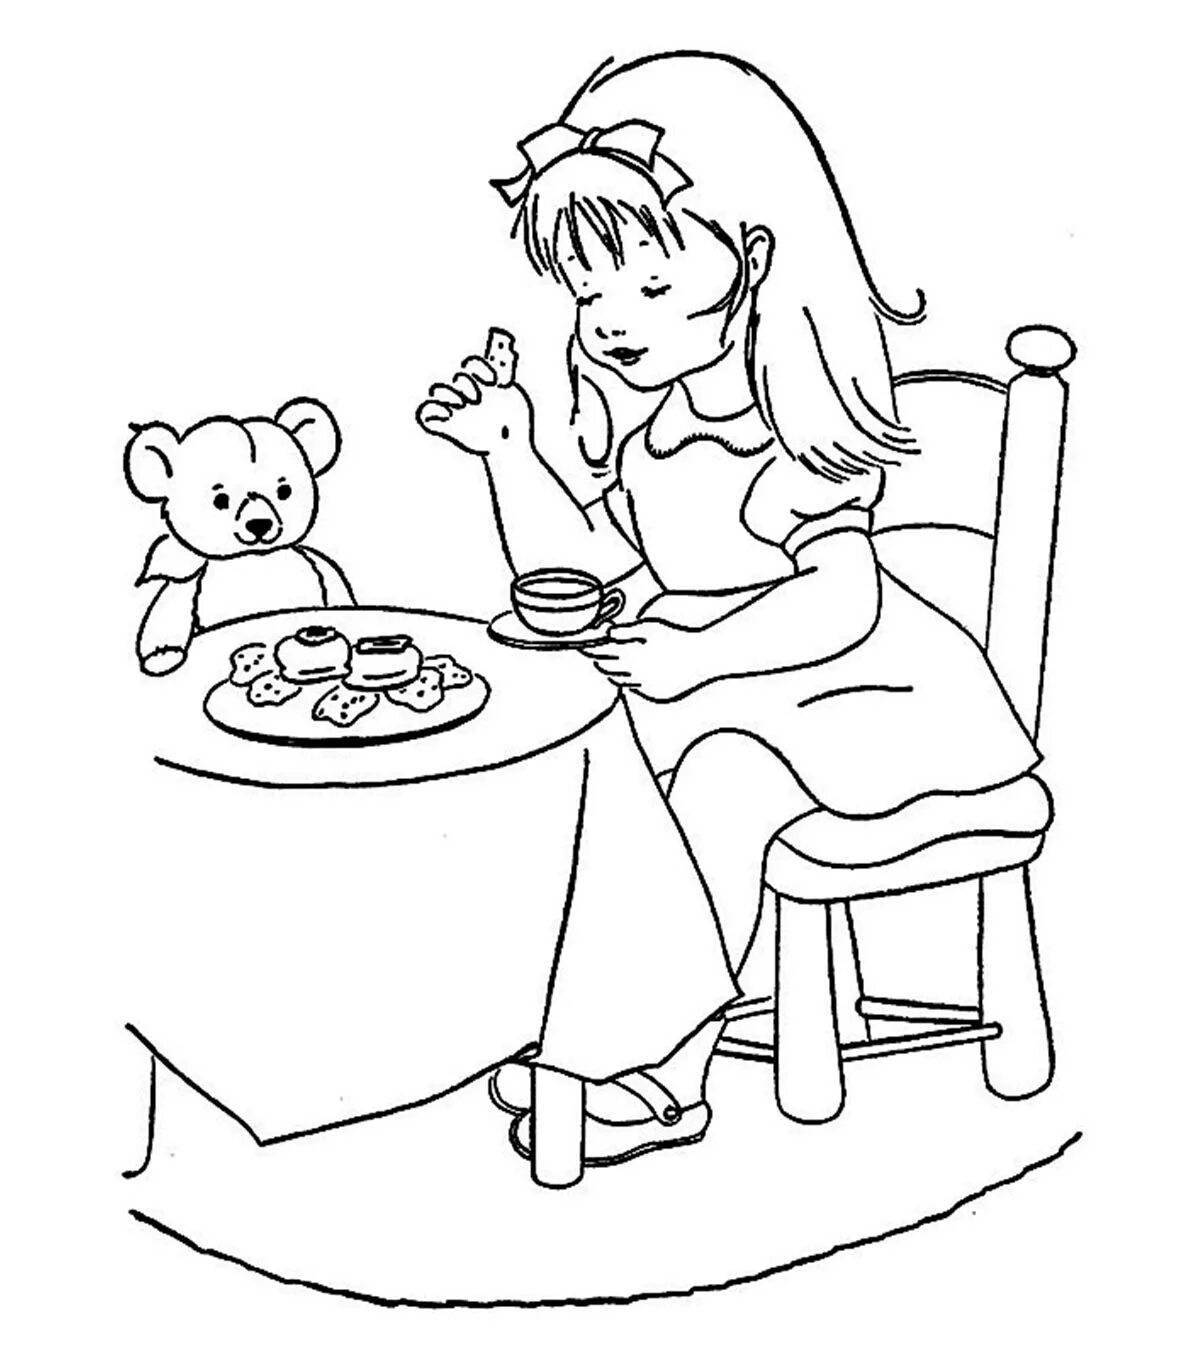 Irresistible etiquette coloring book for kids